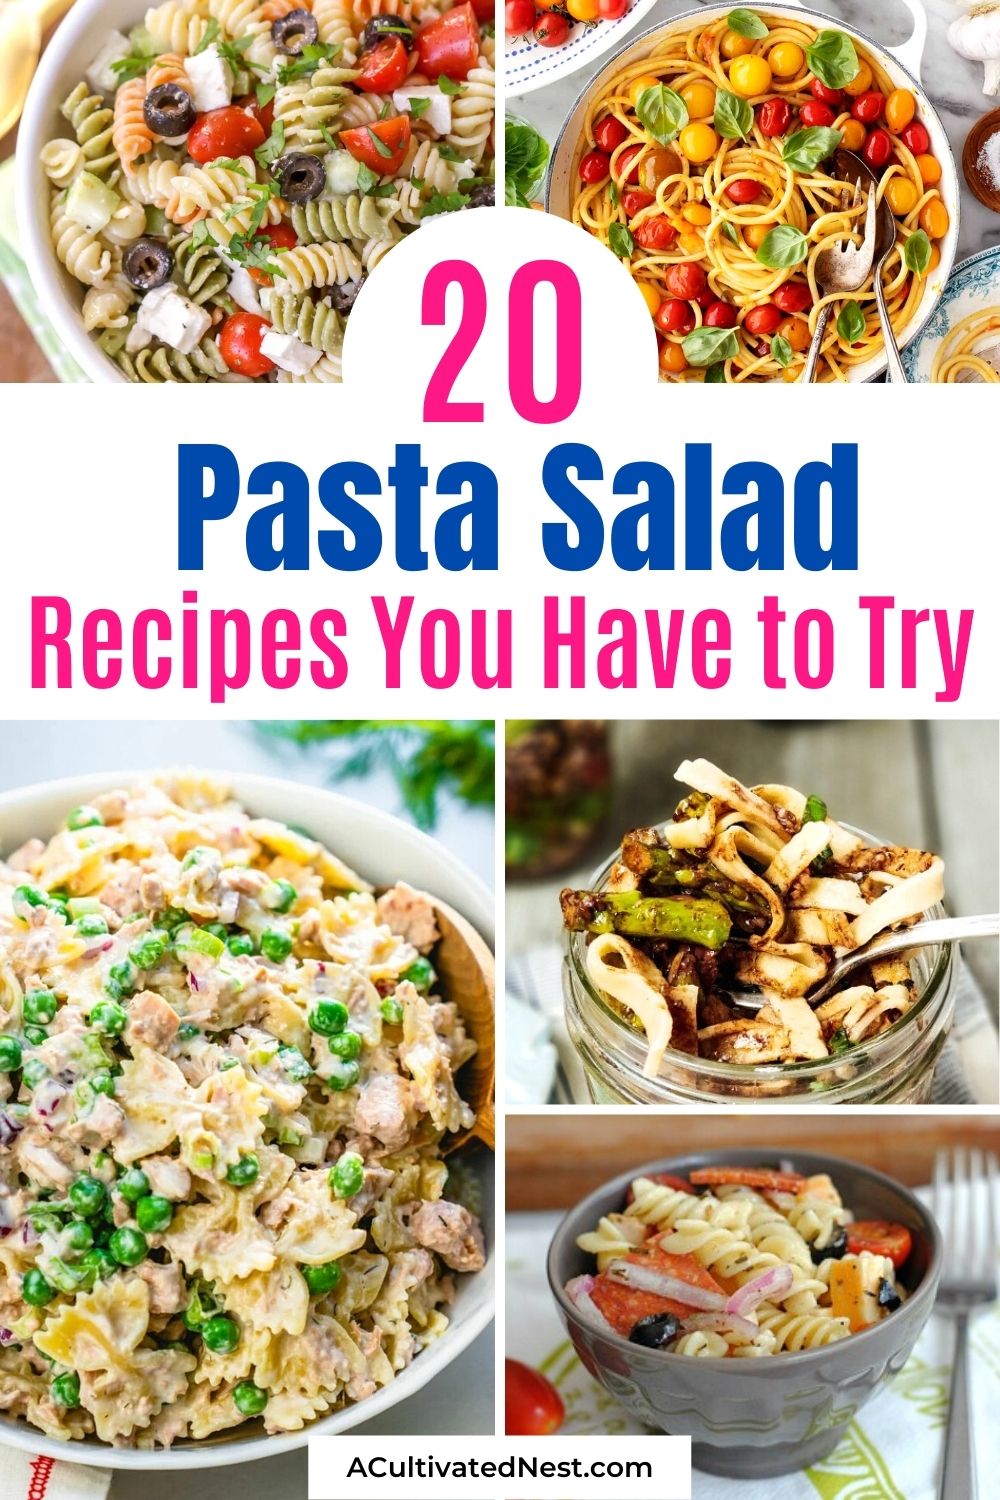 20 Delicious Pasta Salad Recipes- If you want a delicious side or main dish to enjoy this summer, then you'll love these 20 pasta salad recipes! This collection of recipes includes pasta salads that are tangy, sweet, warm, cool, and all oh so, refreshing! | #pastaSalads #recipe #summerRecipes #homemadePastaSalad #ACultivatedNest